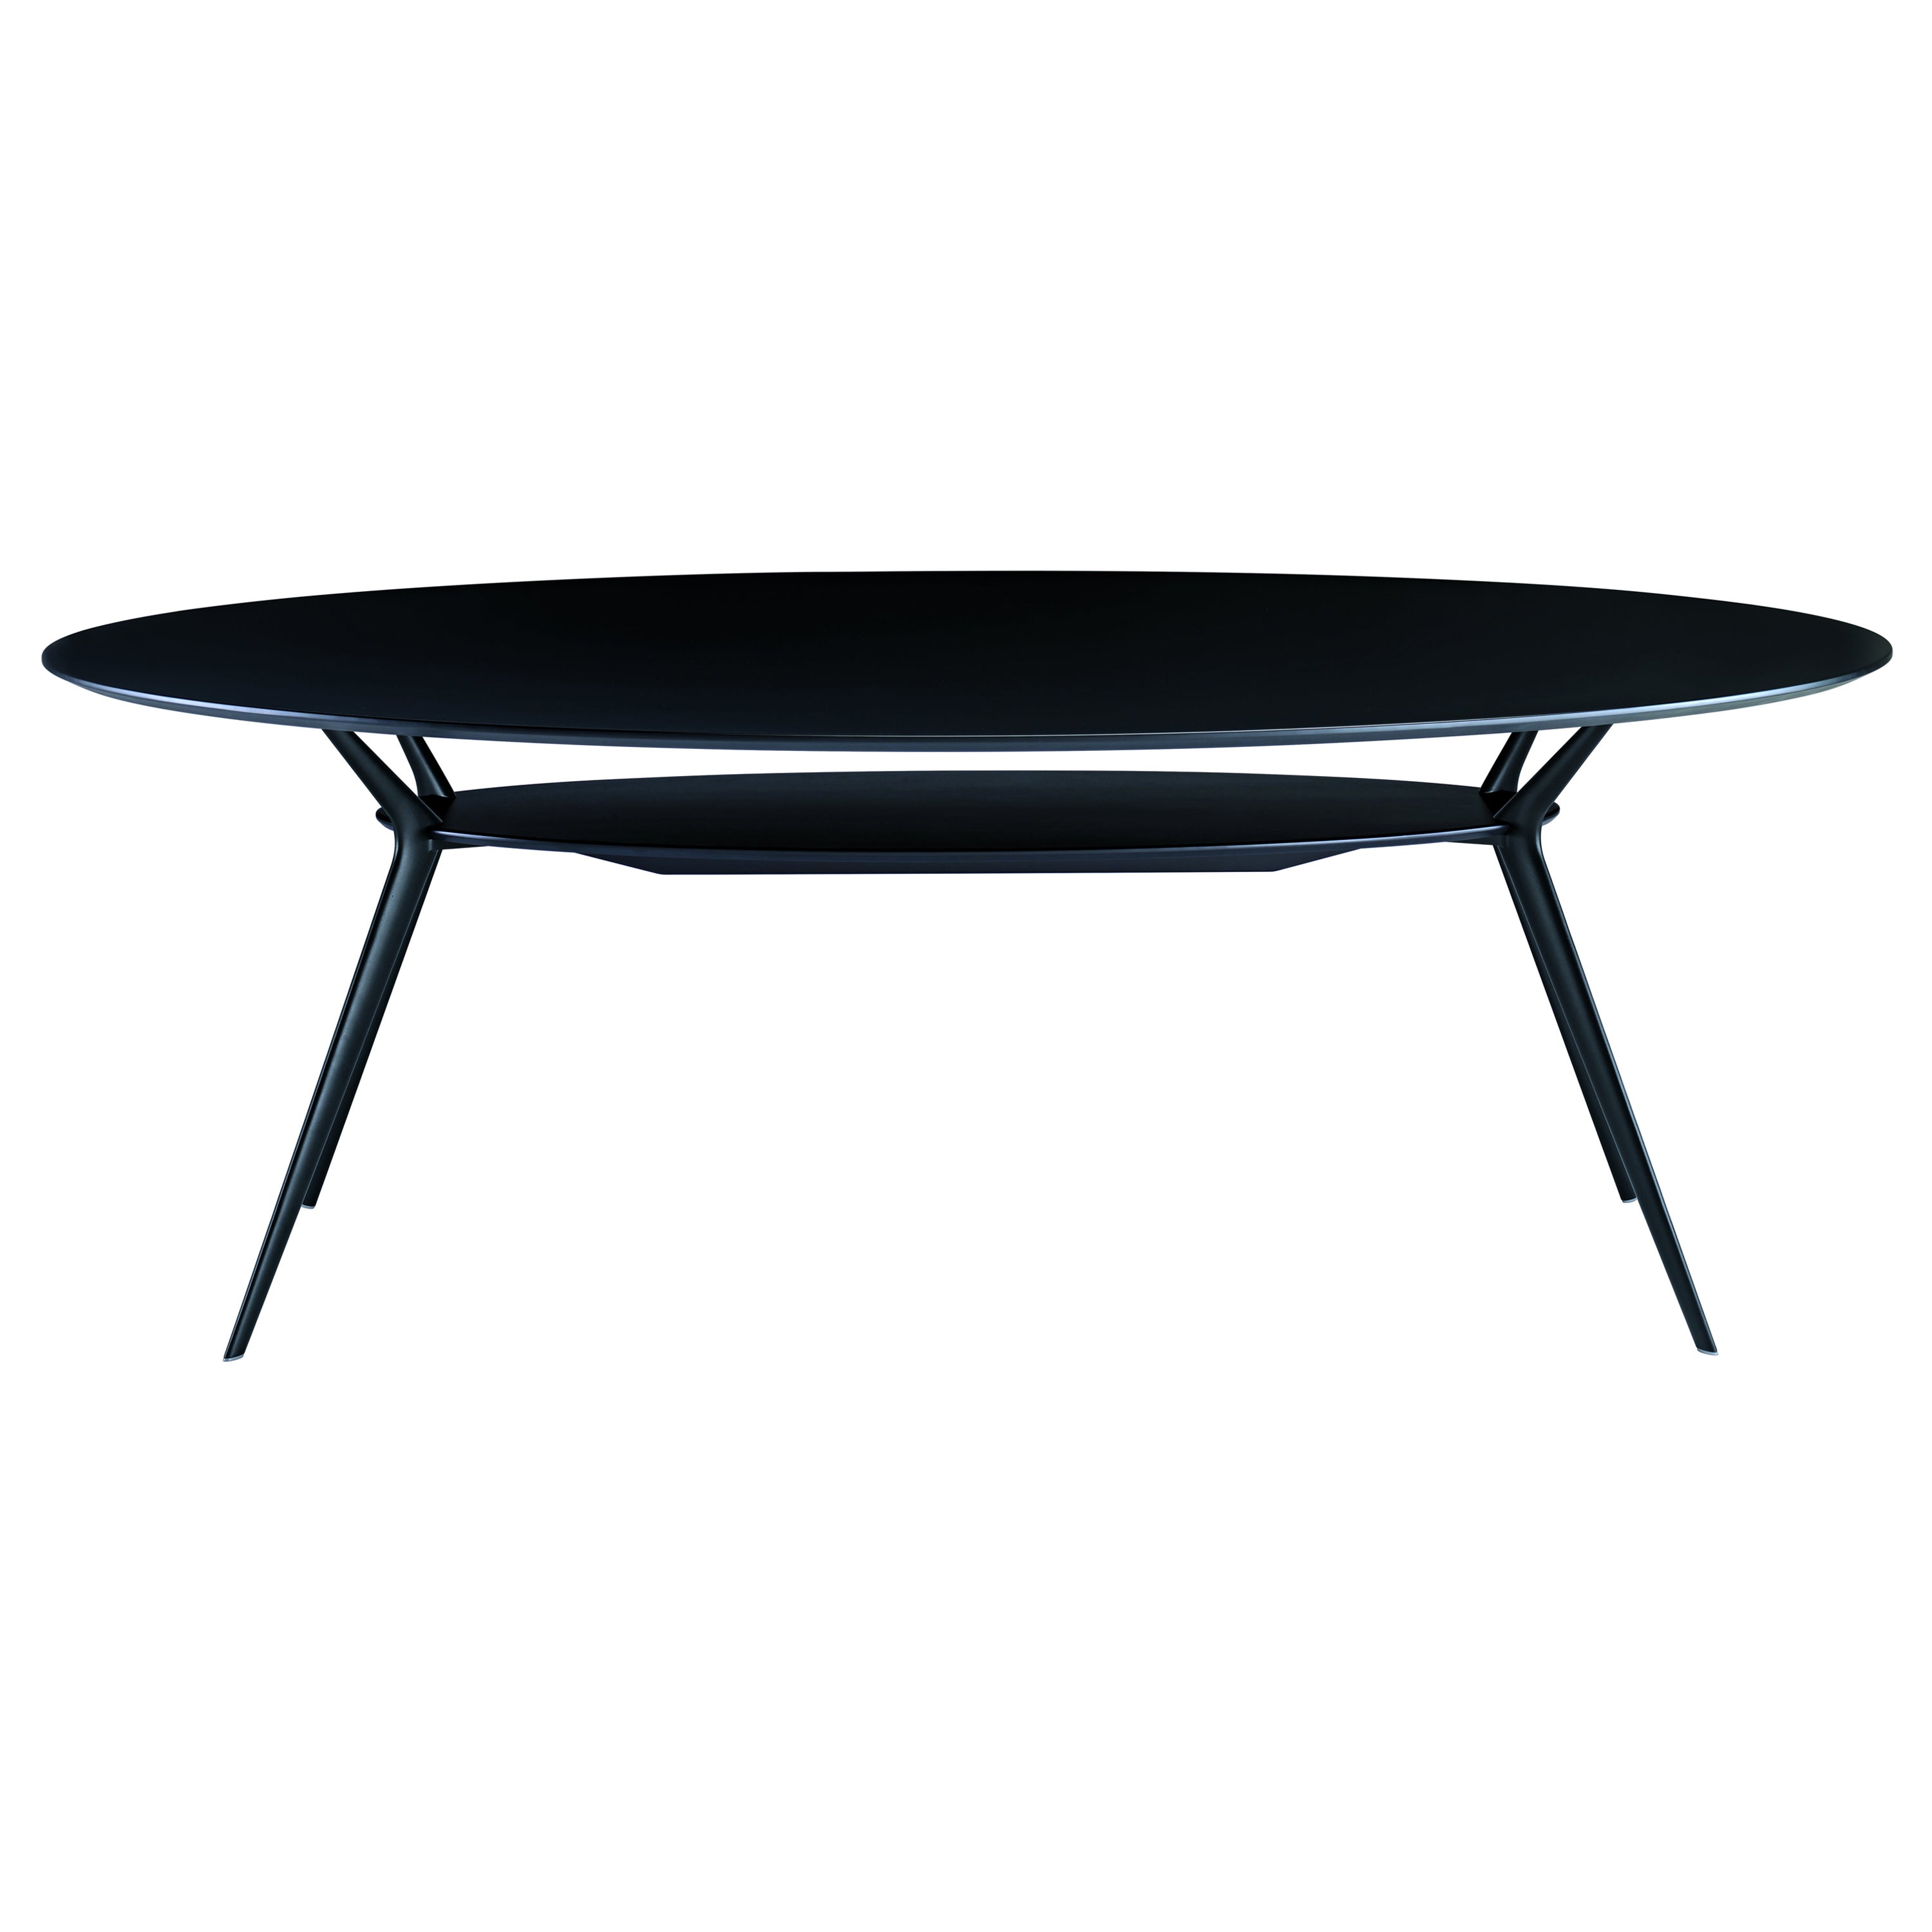 Alias Biplane 407 Oval Table in Black MDF Top and Black Polished Aluminium Frame For Sale